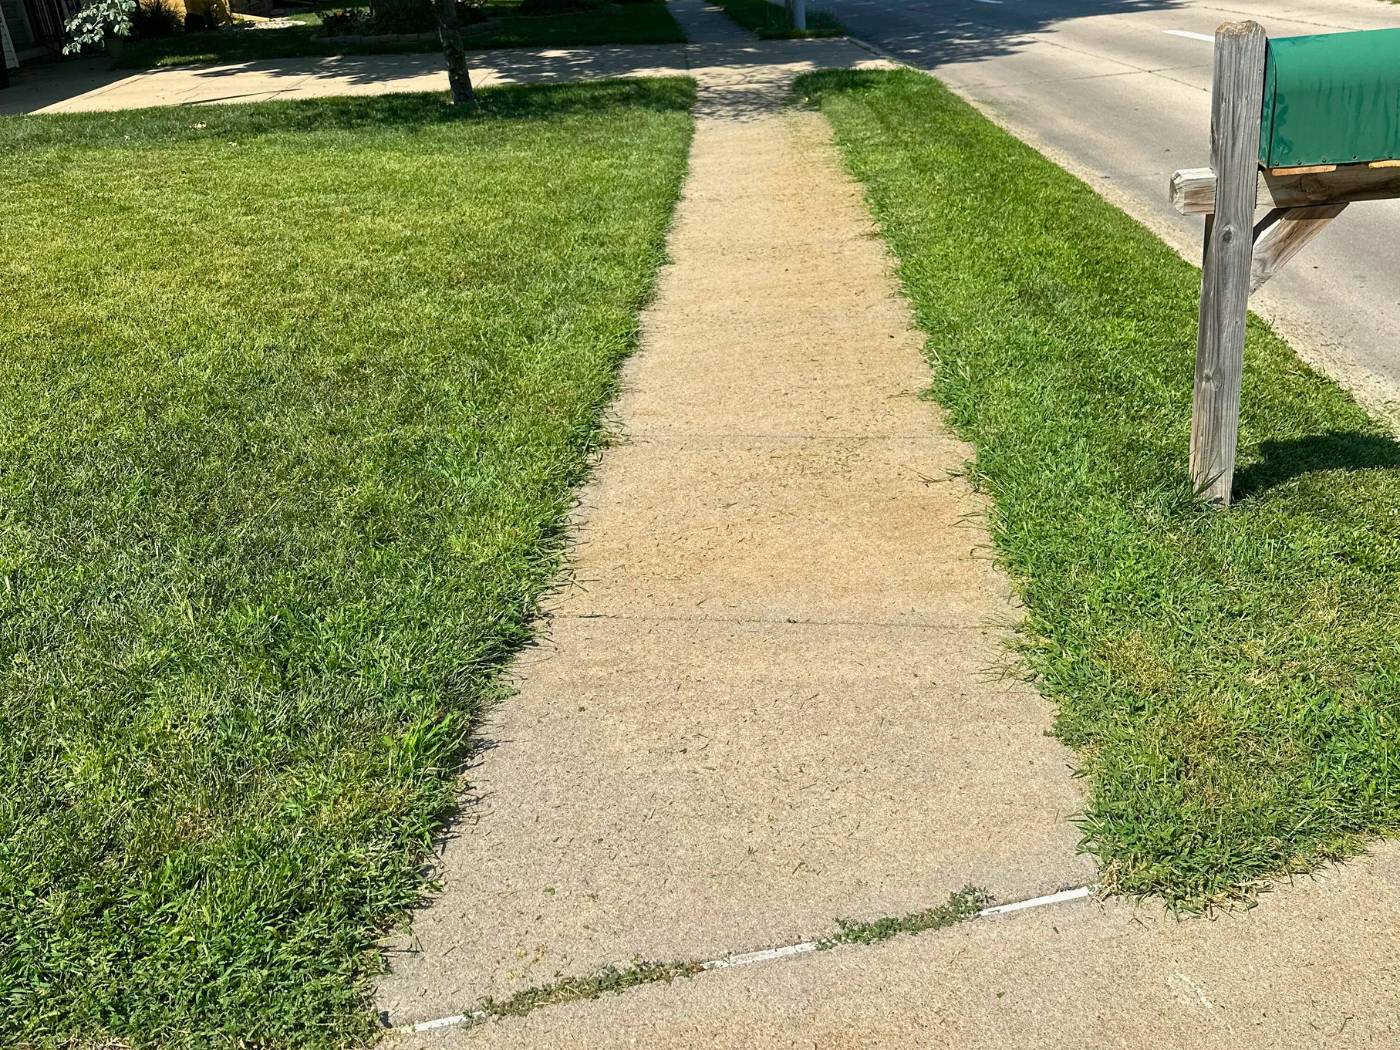 Image of a sidewalk with the before the grass is cut and edged on both sides.